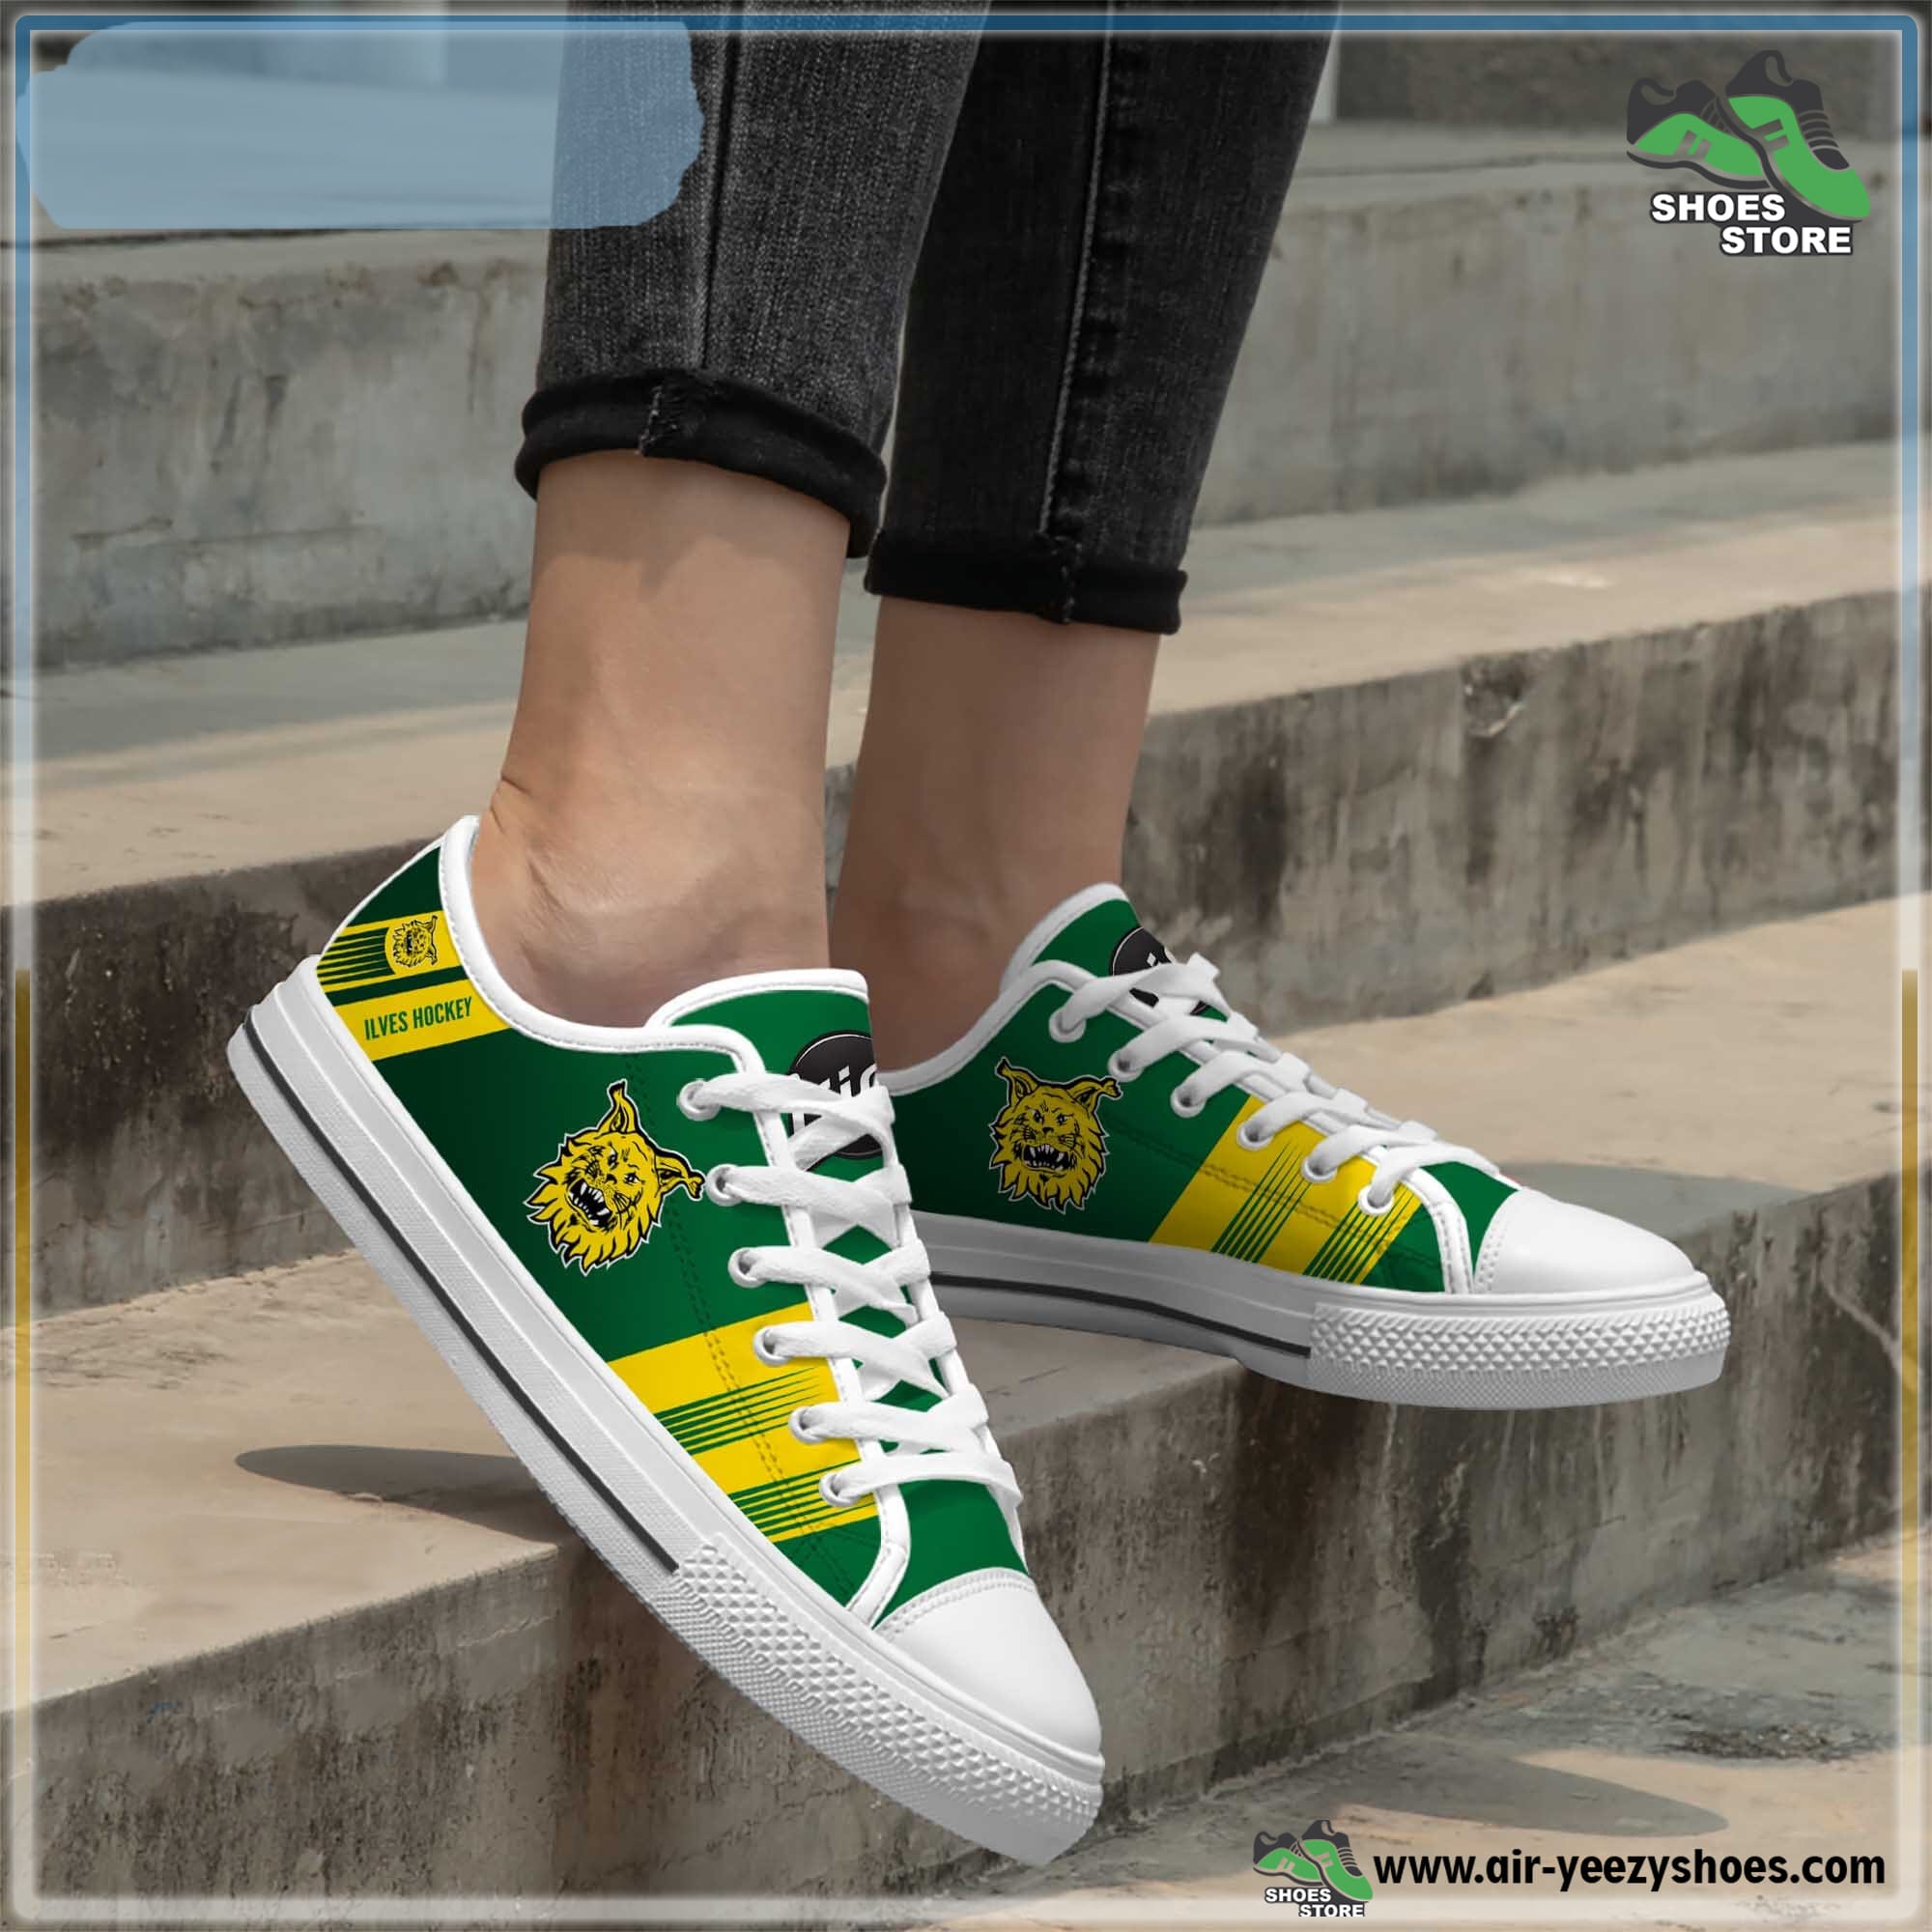 Ilves Hockey liiga Canvas Low Top Shoes